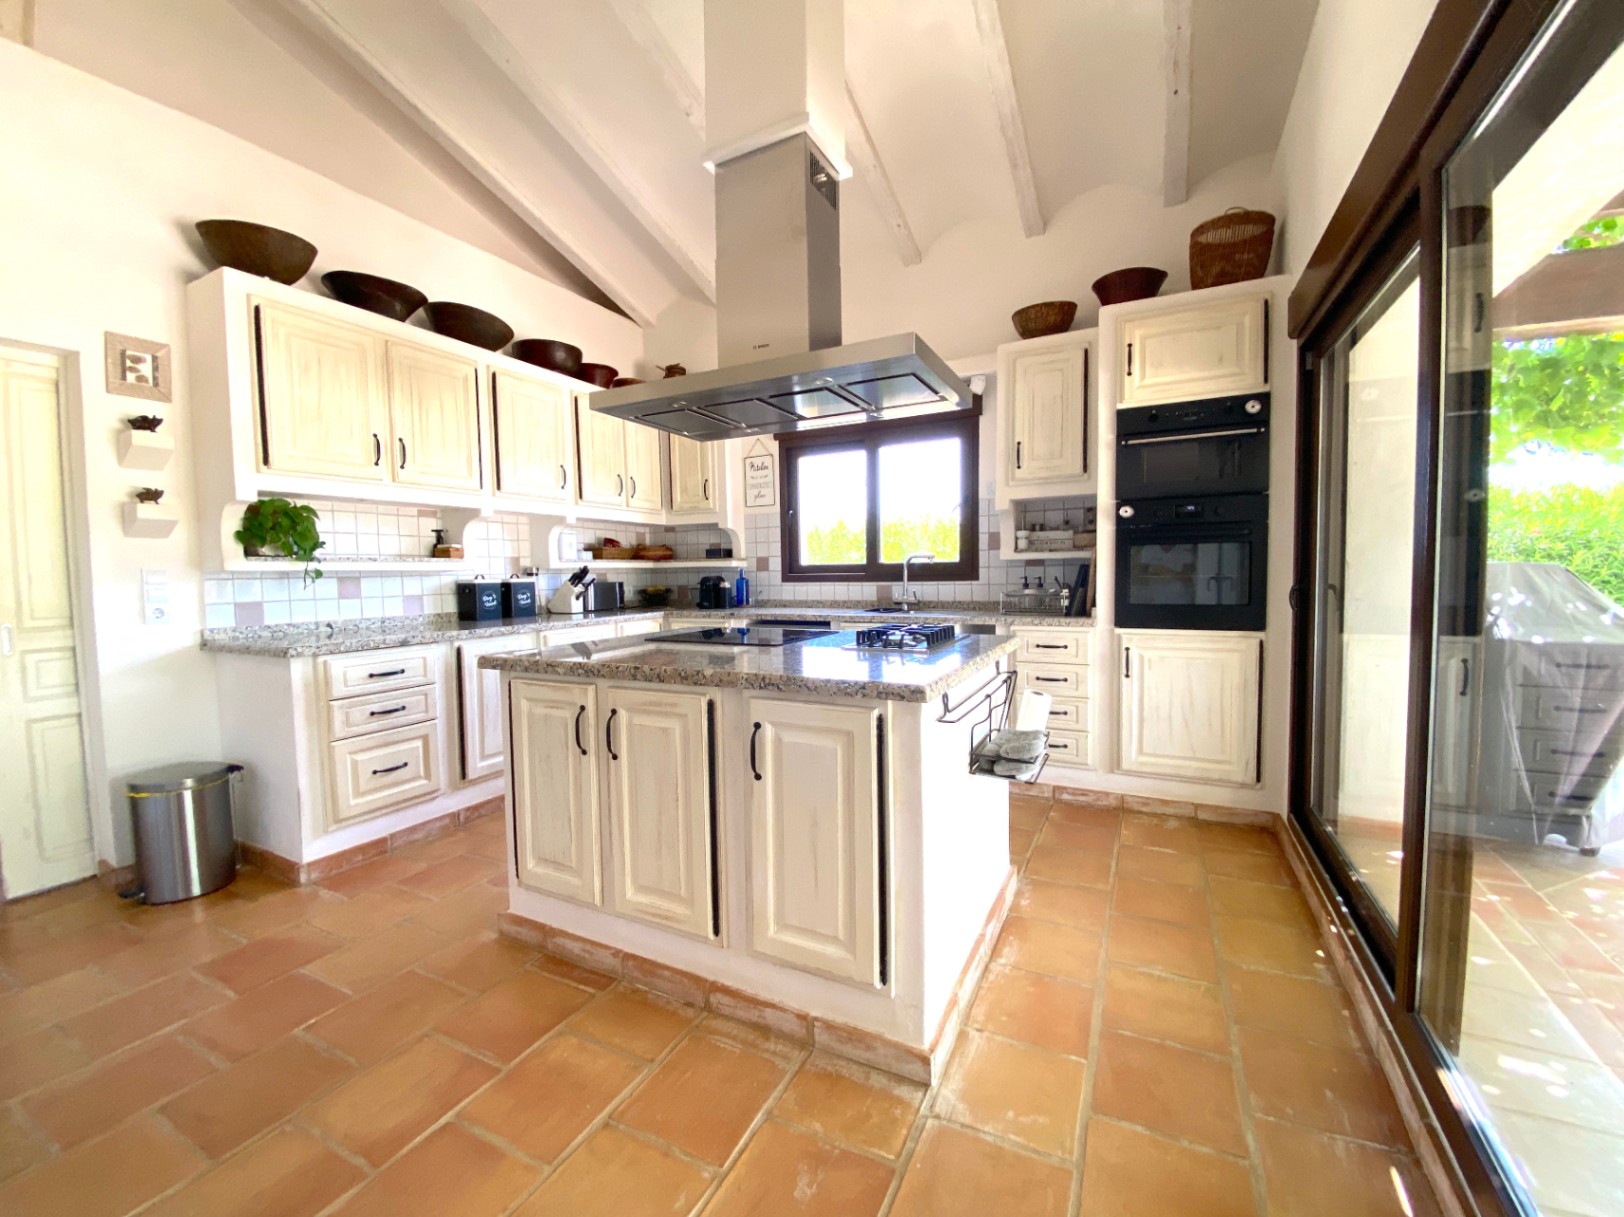 Finca with 5 bedrooms and 5 bathrooms en suite, 3 further bathrooms outside.